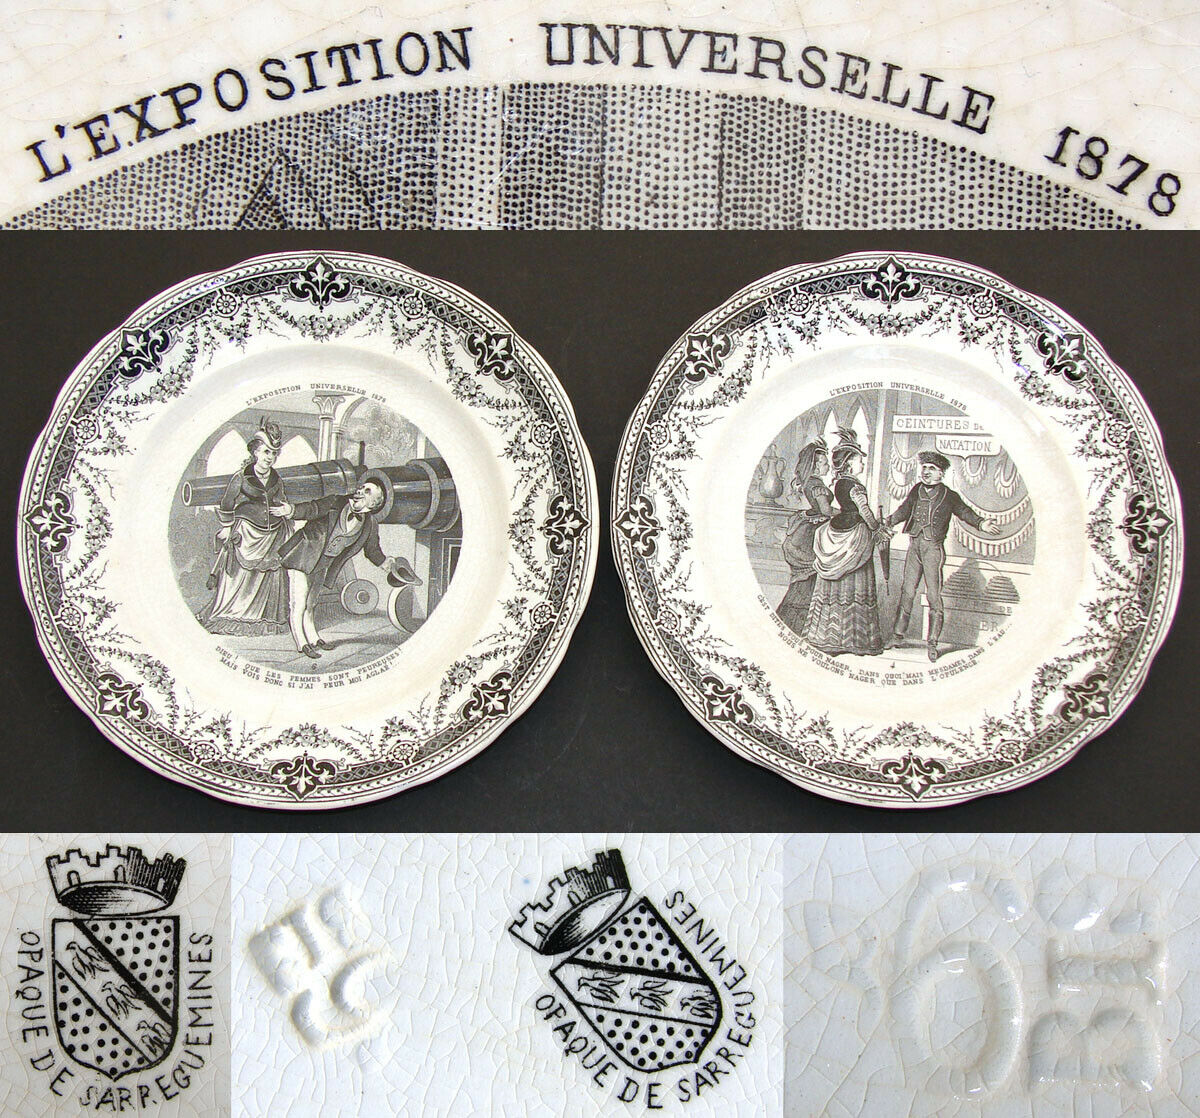 Antique French Figural Cabinet Plate Pair, “L’Exposition Universelle 1878”